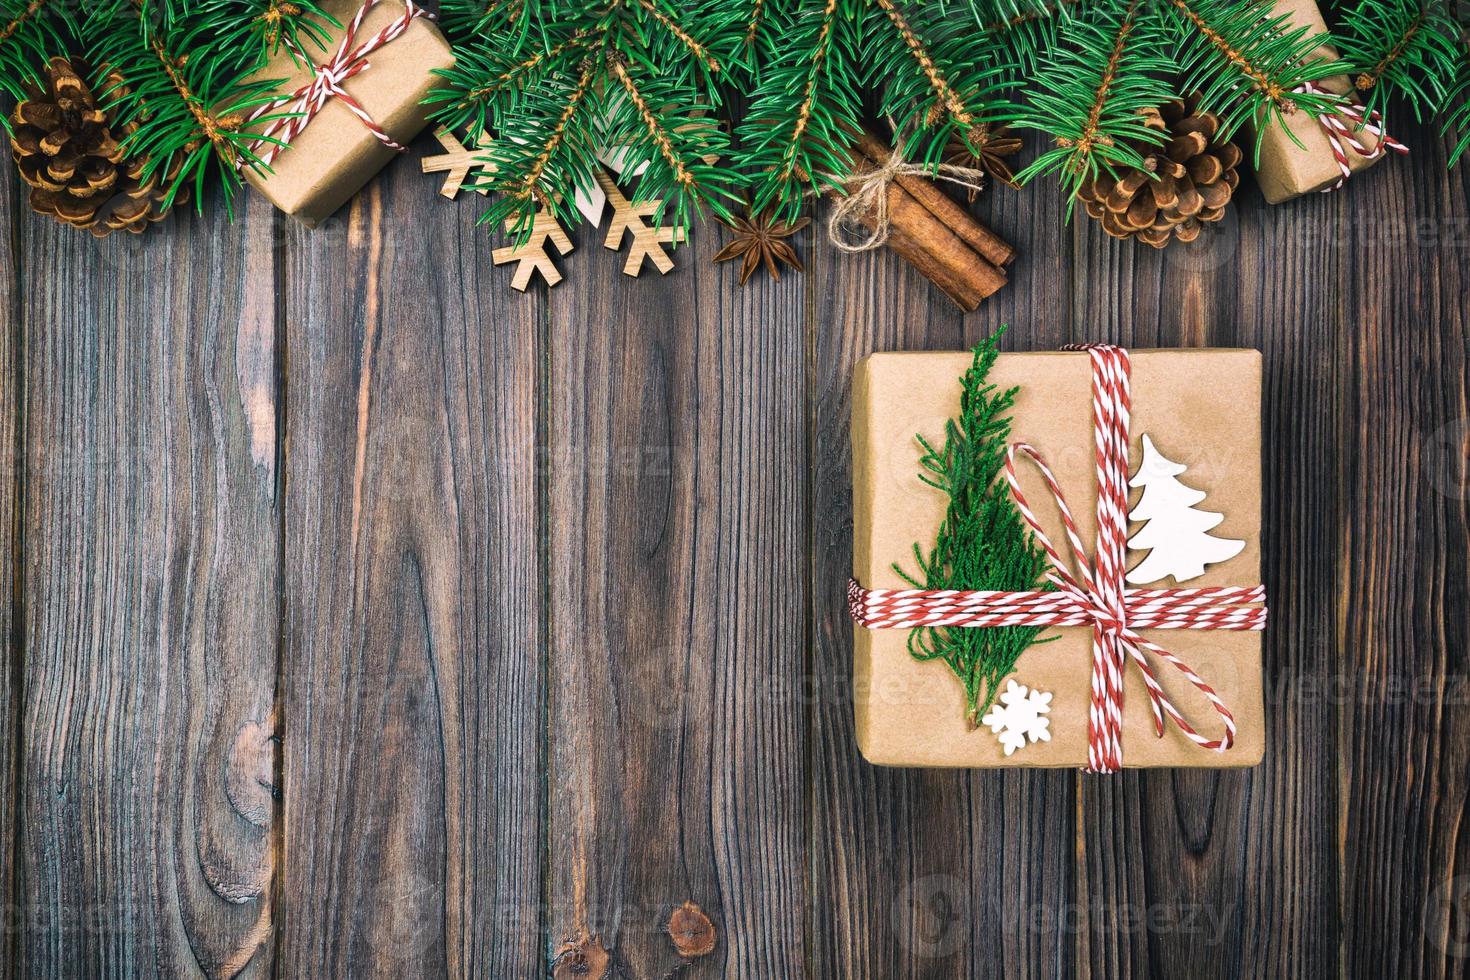 Christmas vintage, toned background with fir tree and gift box on wooden table. Top view with copy space for your design photo